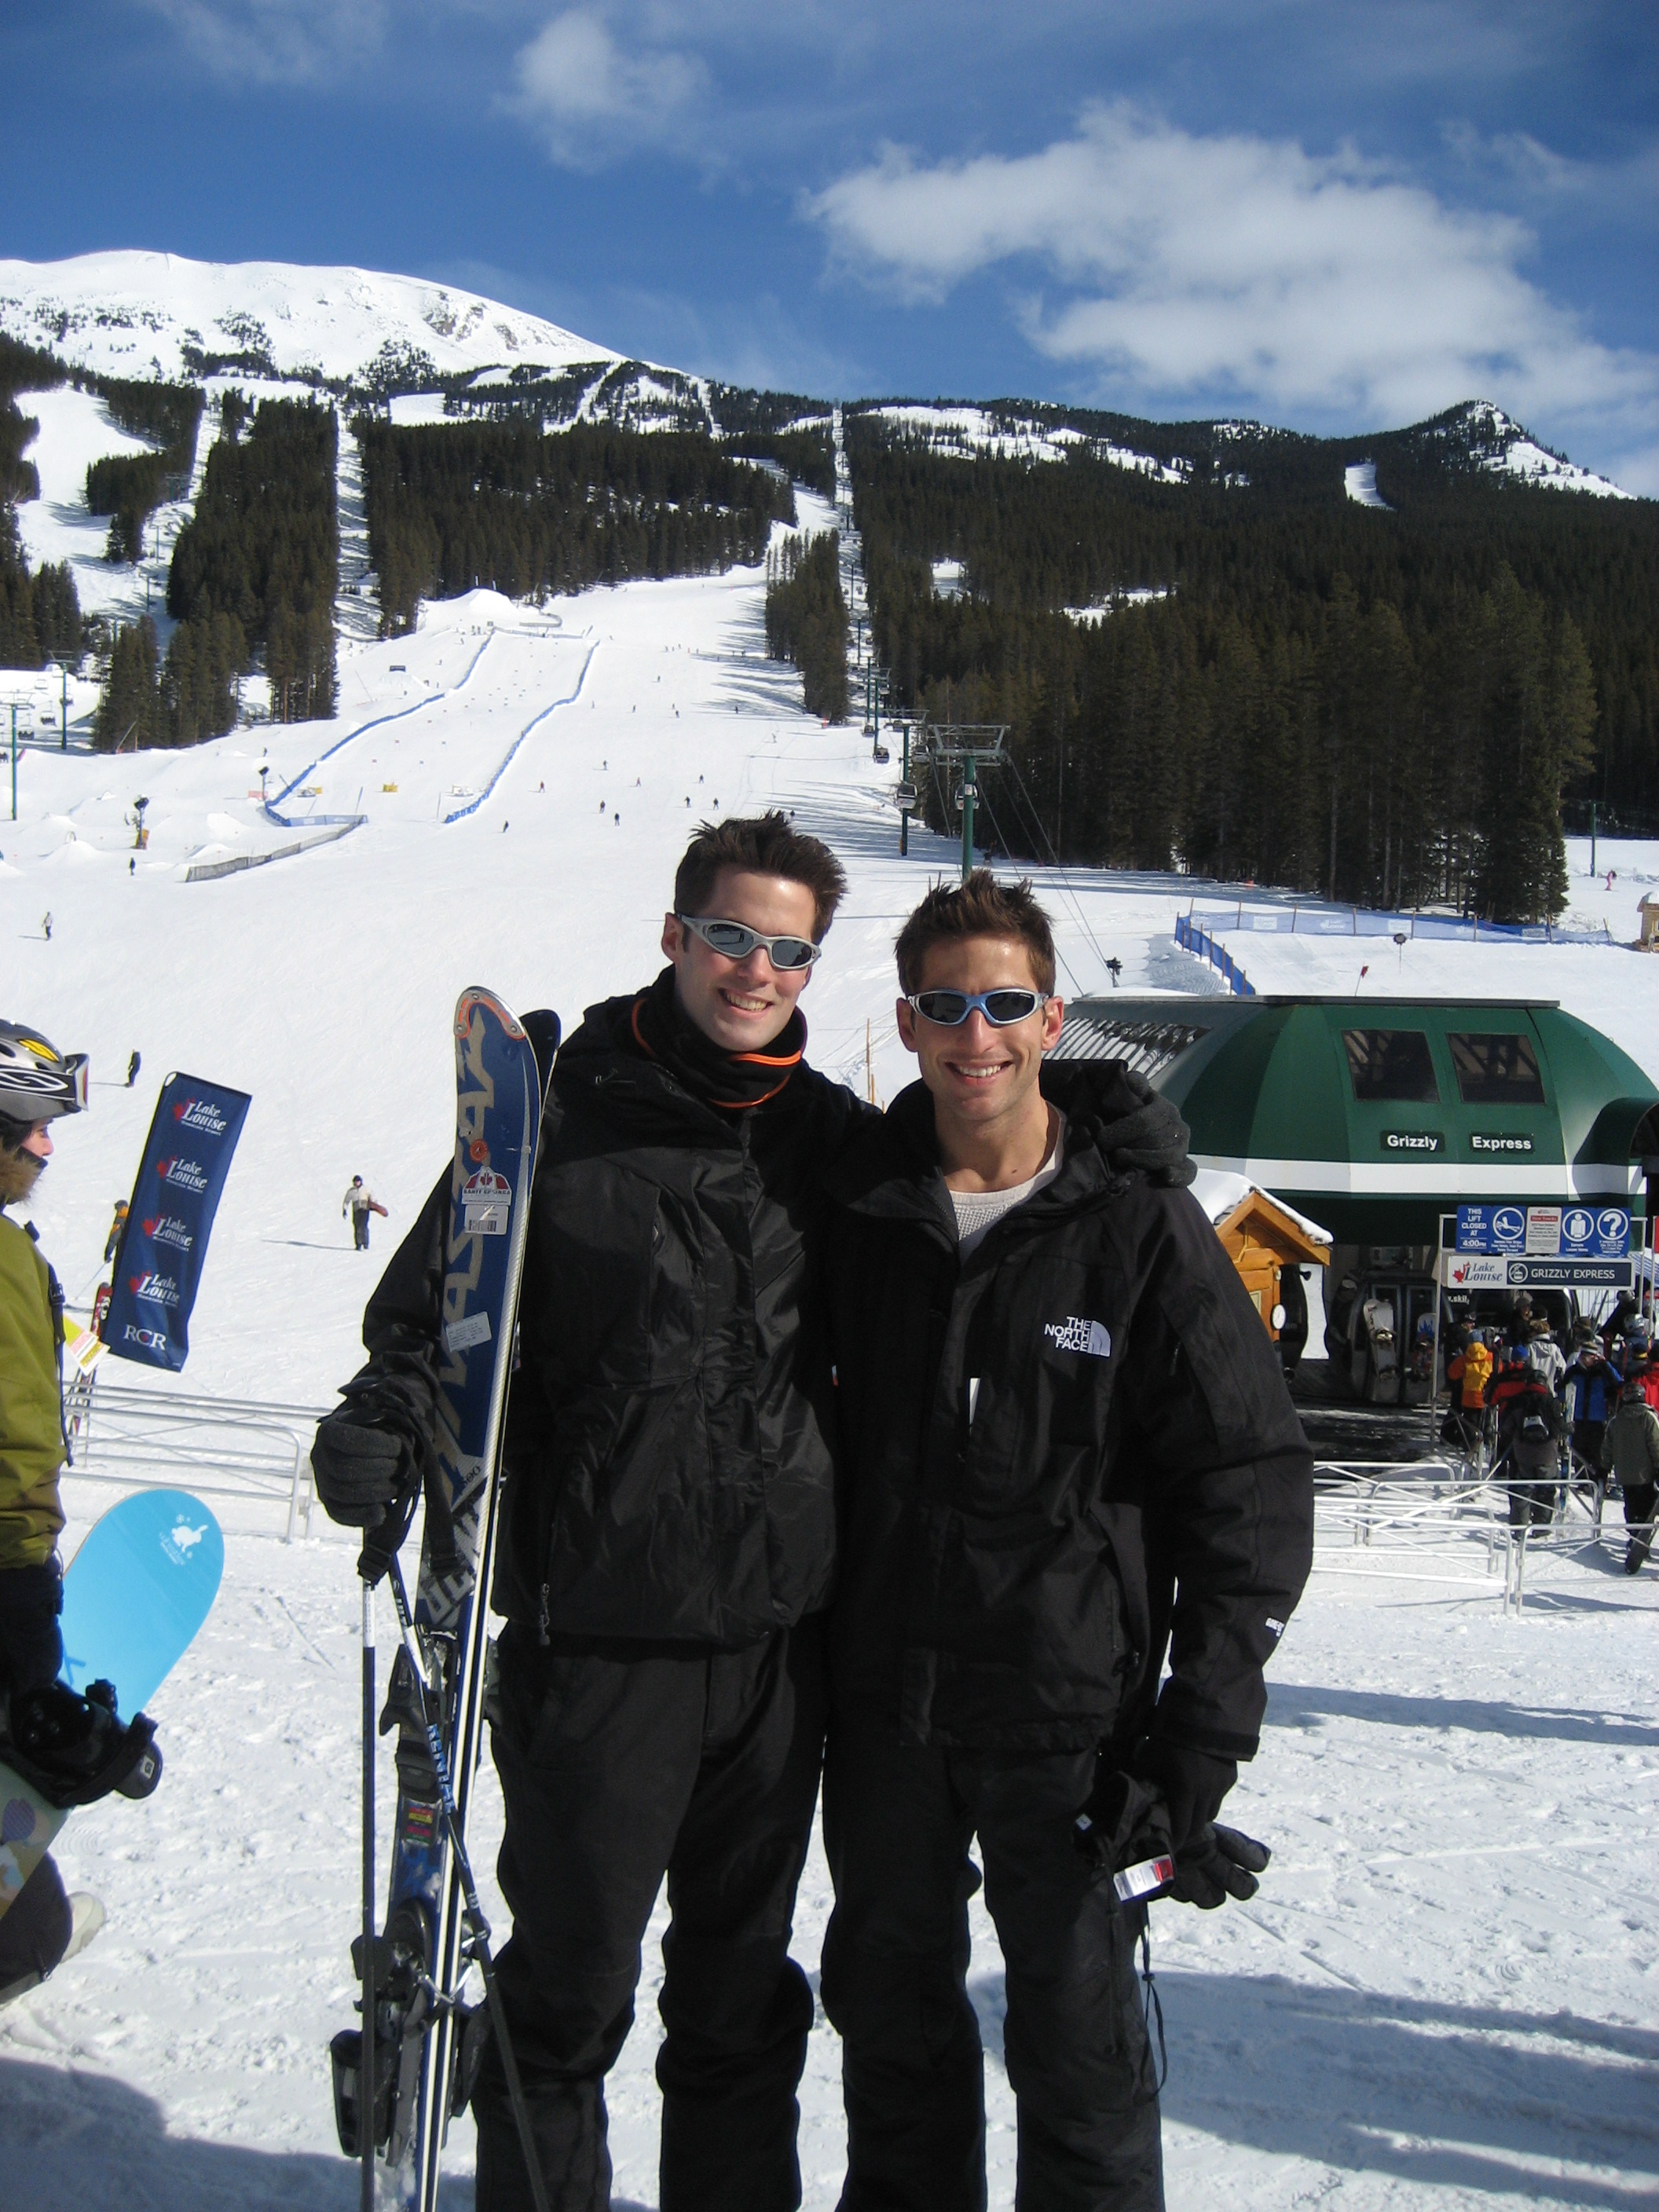  Our first ski trip together. 